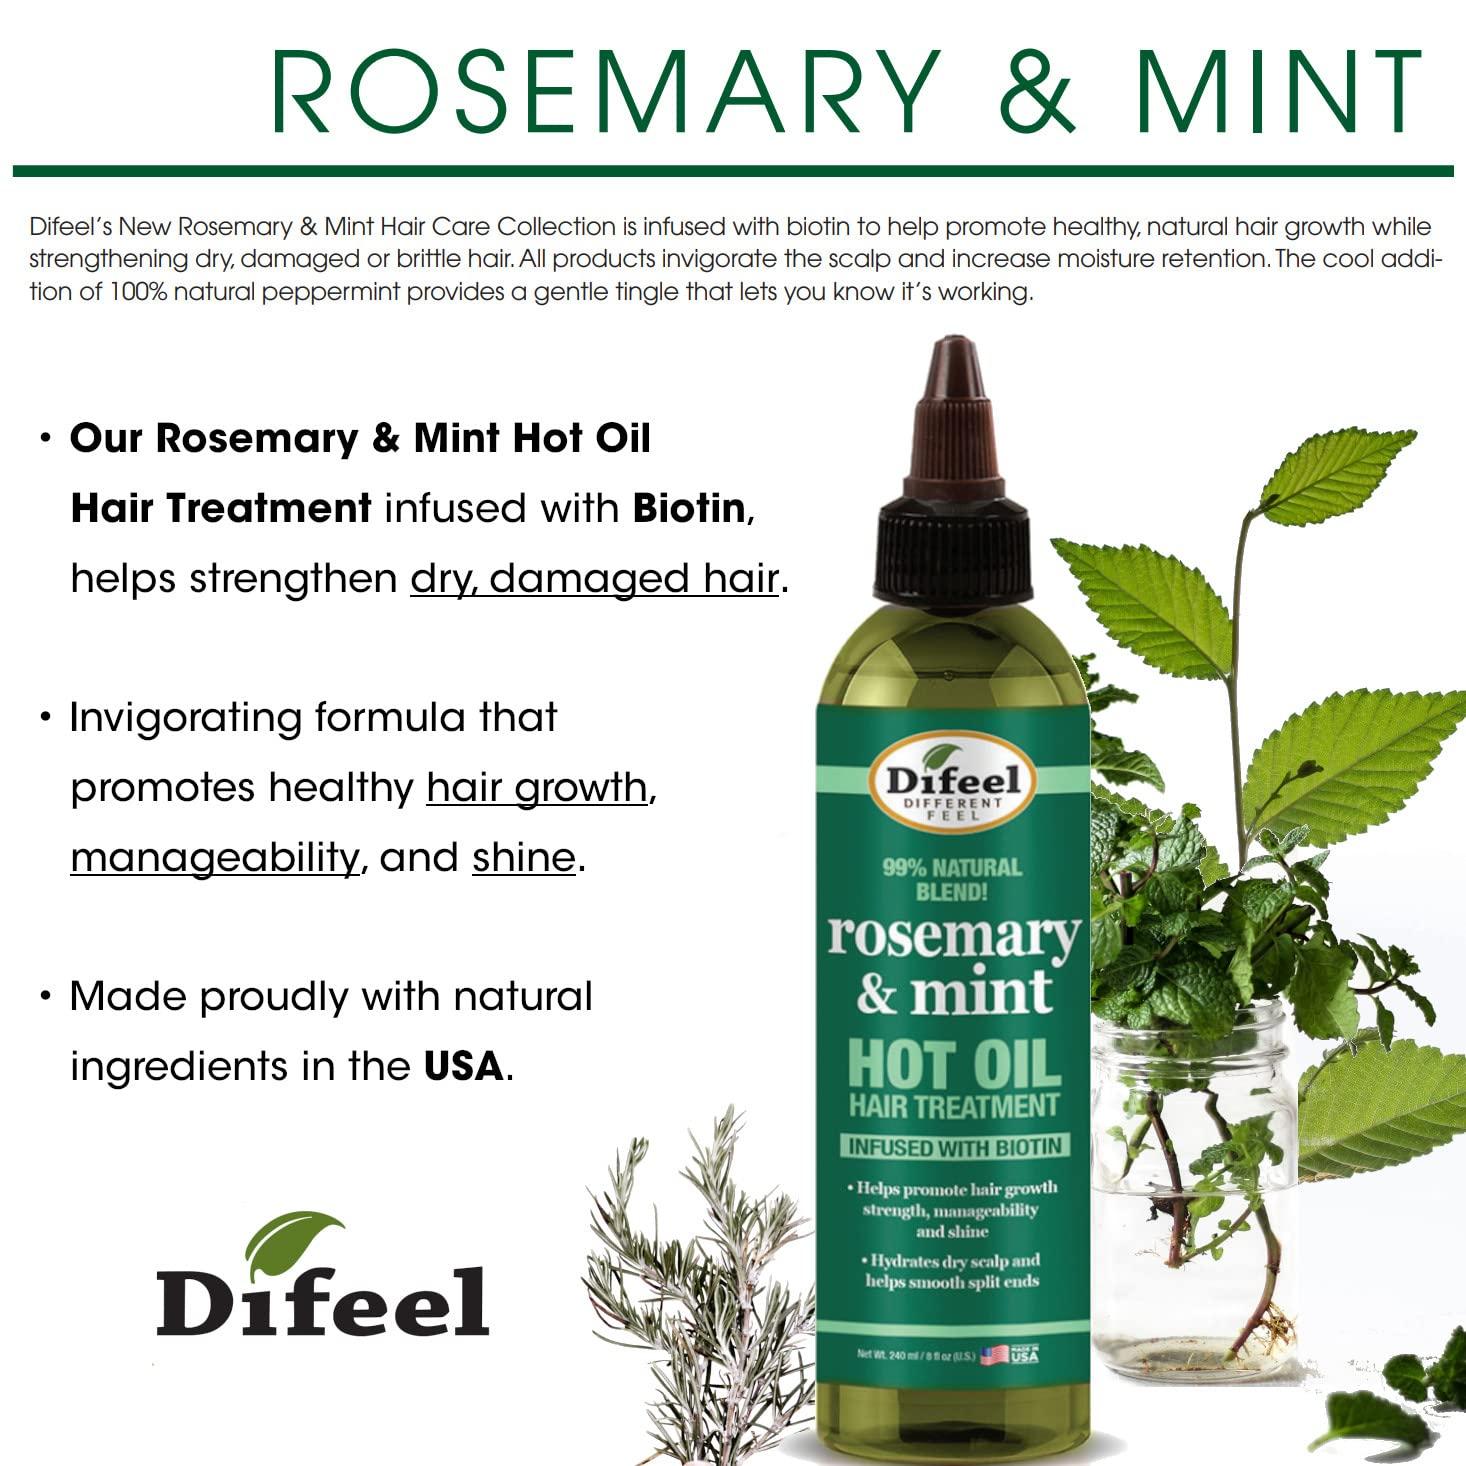 Rosemary Mint Strengthening Shampoo - Treat Dry And Brittle Hair Better!